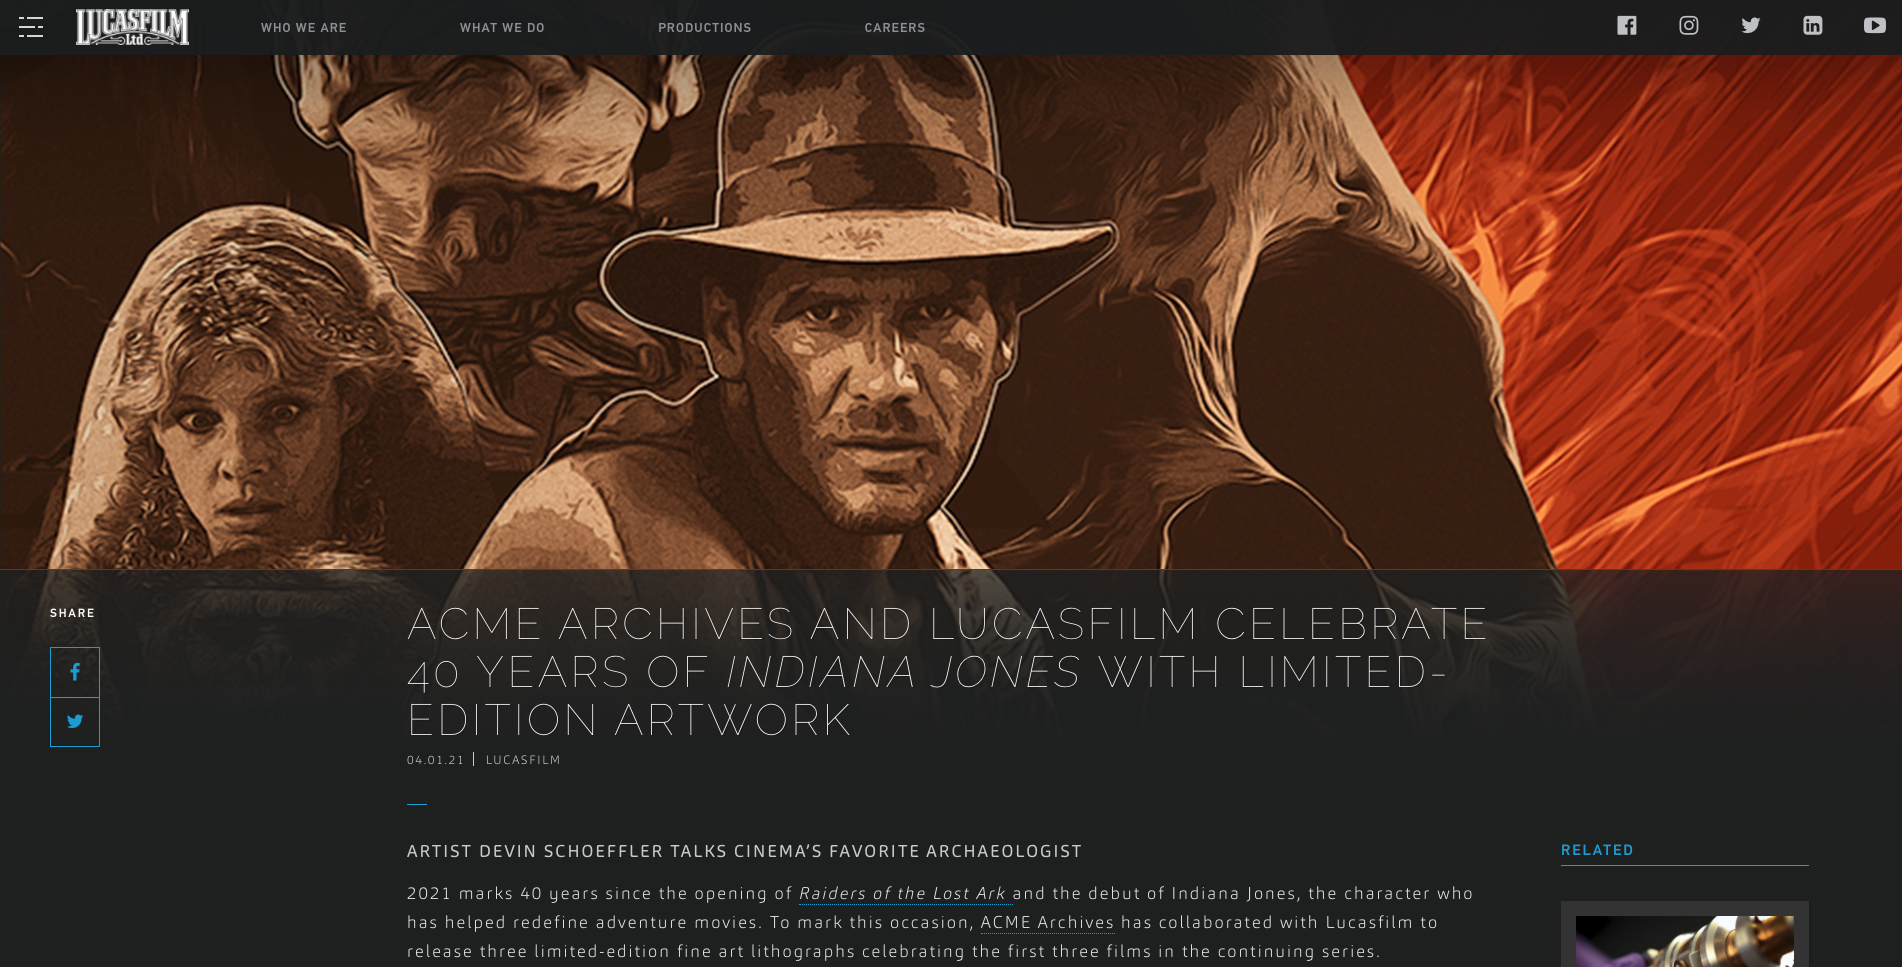 ACME ARCHIVES AND LUCASFILM CELEBRATE 40 YEARS OF INDIANA JONES WITH LIMITED-EDITION ARTWORK